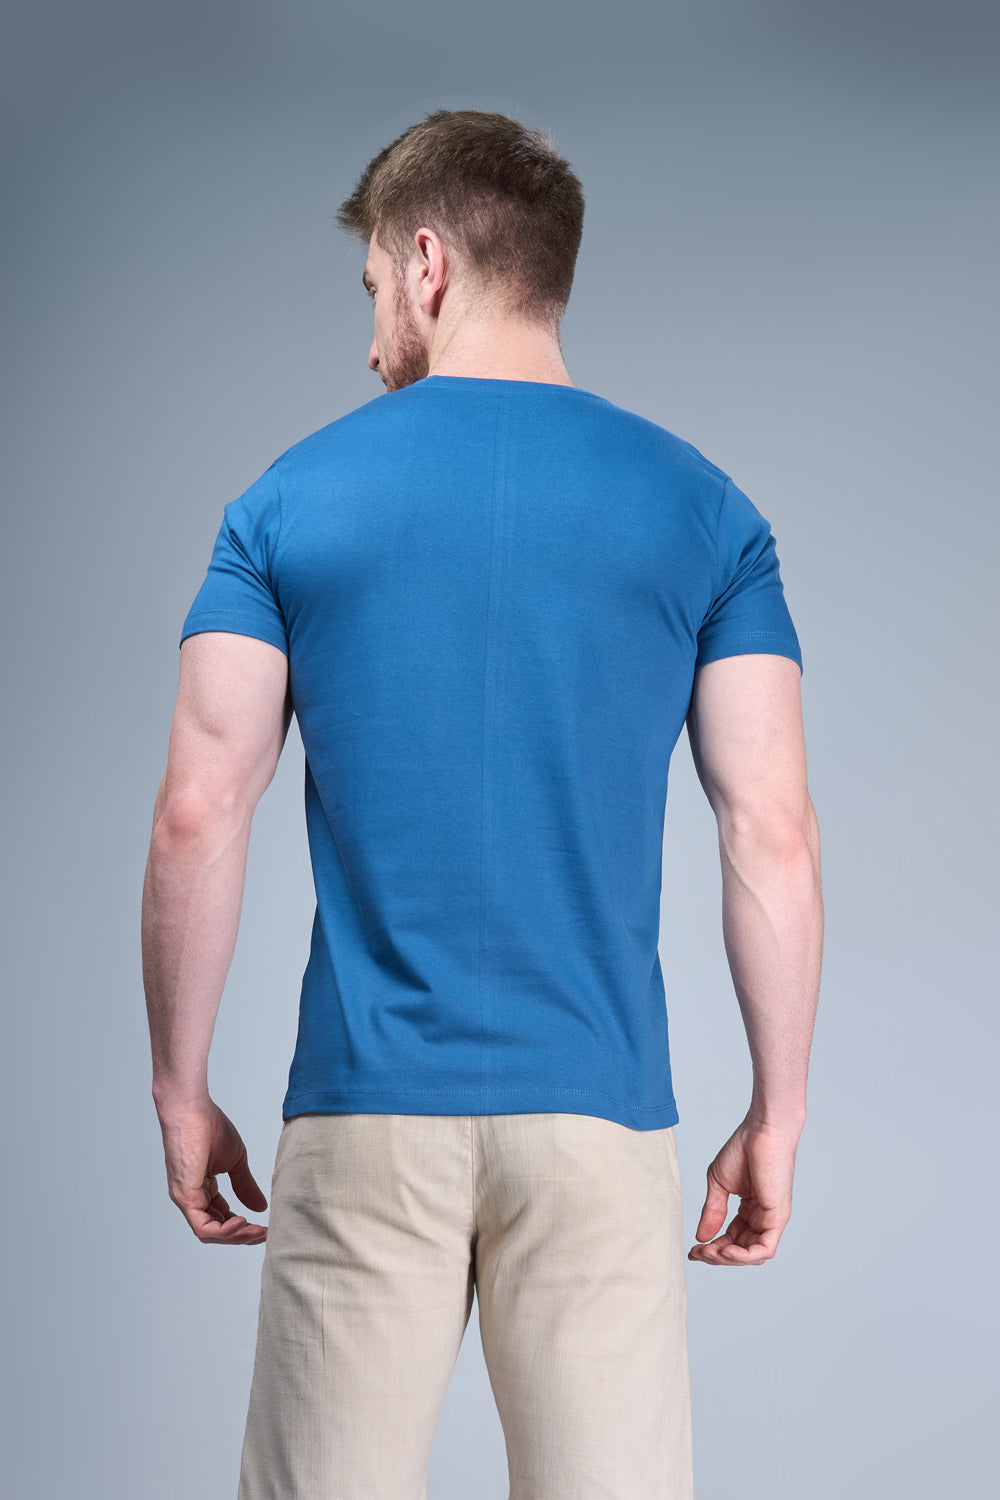 Blue colored, cotton Graphic T shirt for men, half sleeves and round neck, back view.